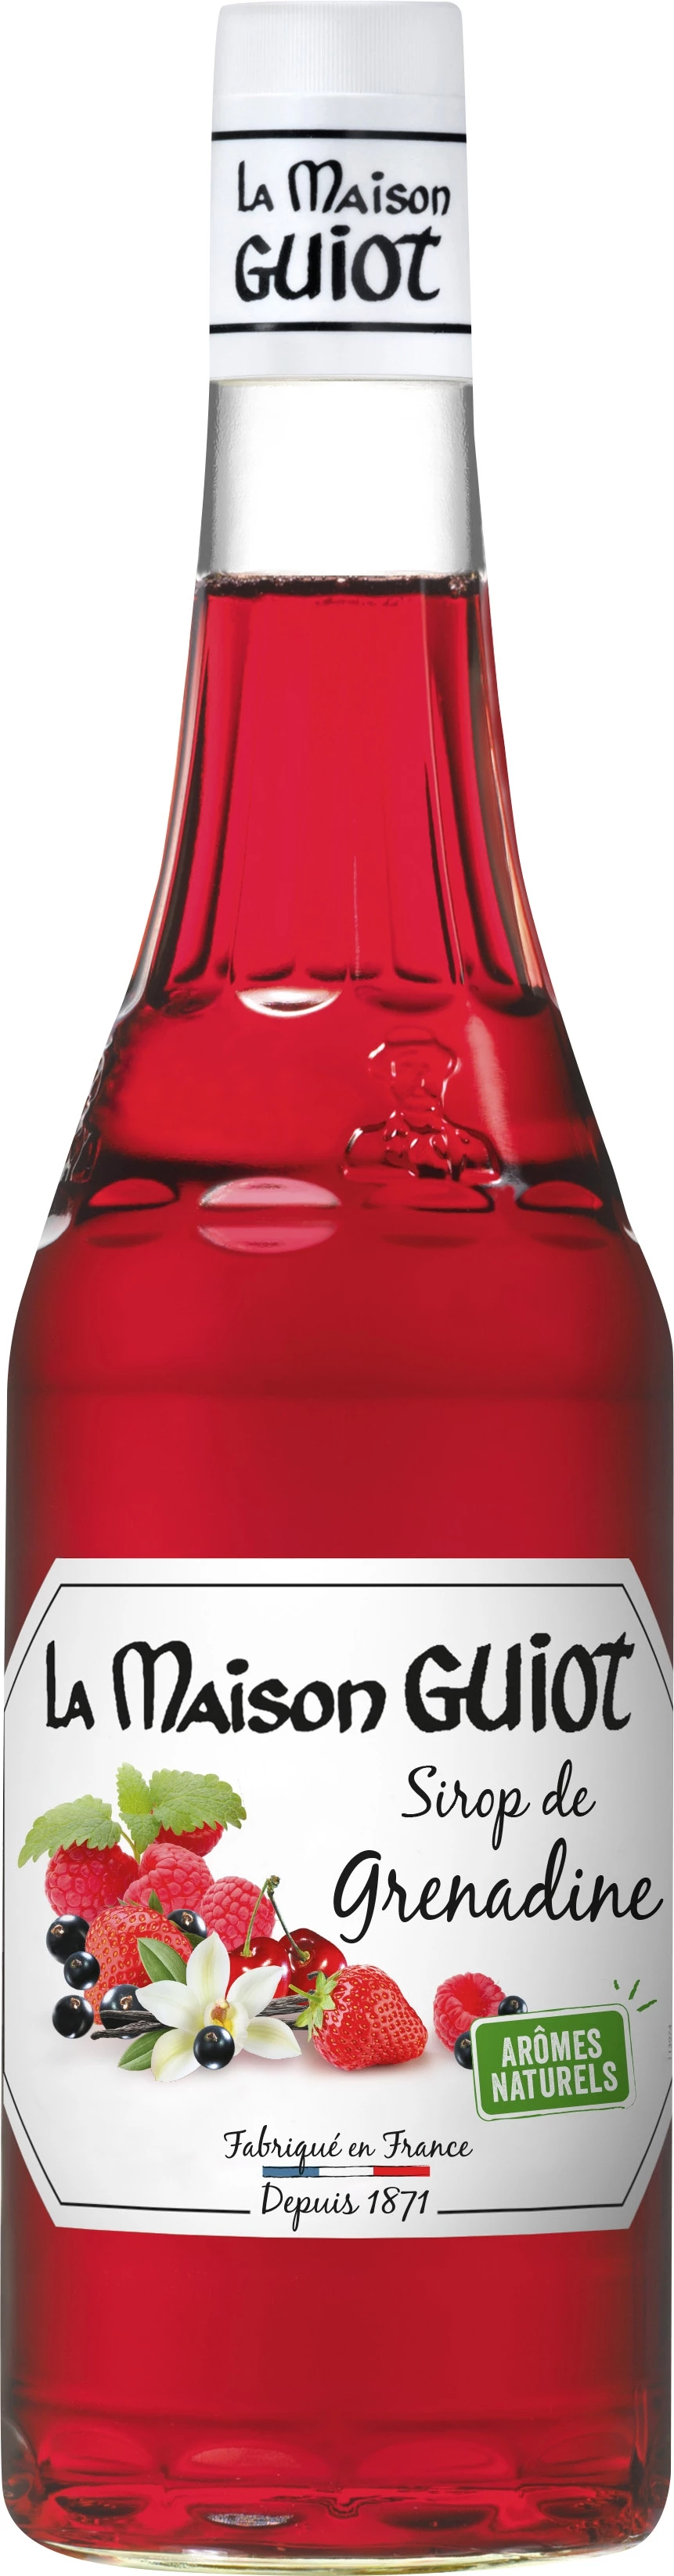 Guiot Grenadine Syrup 70cl